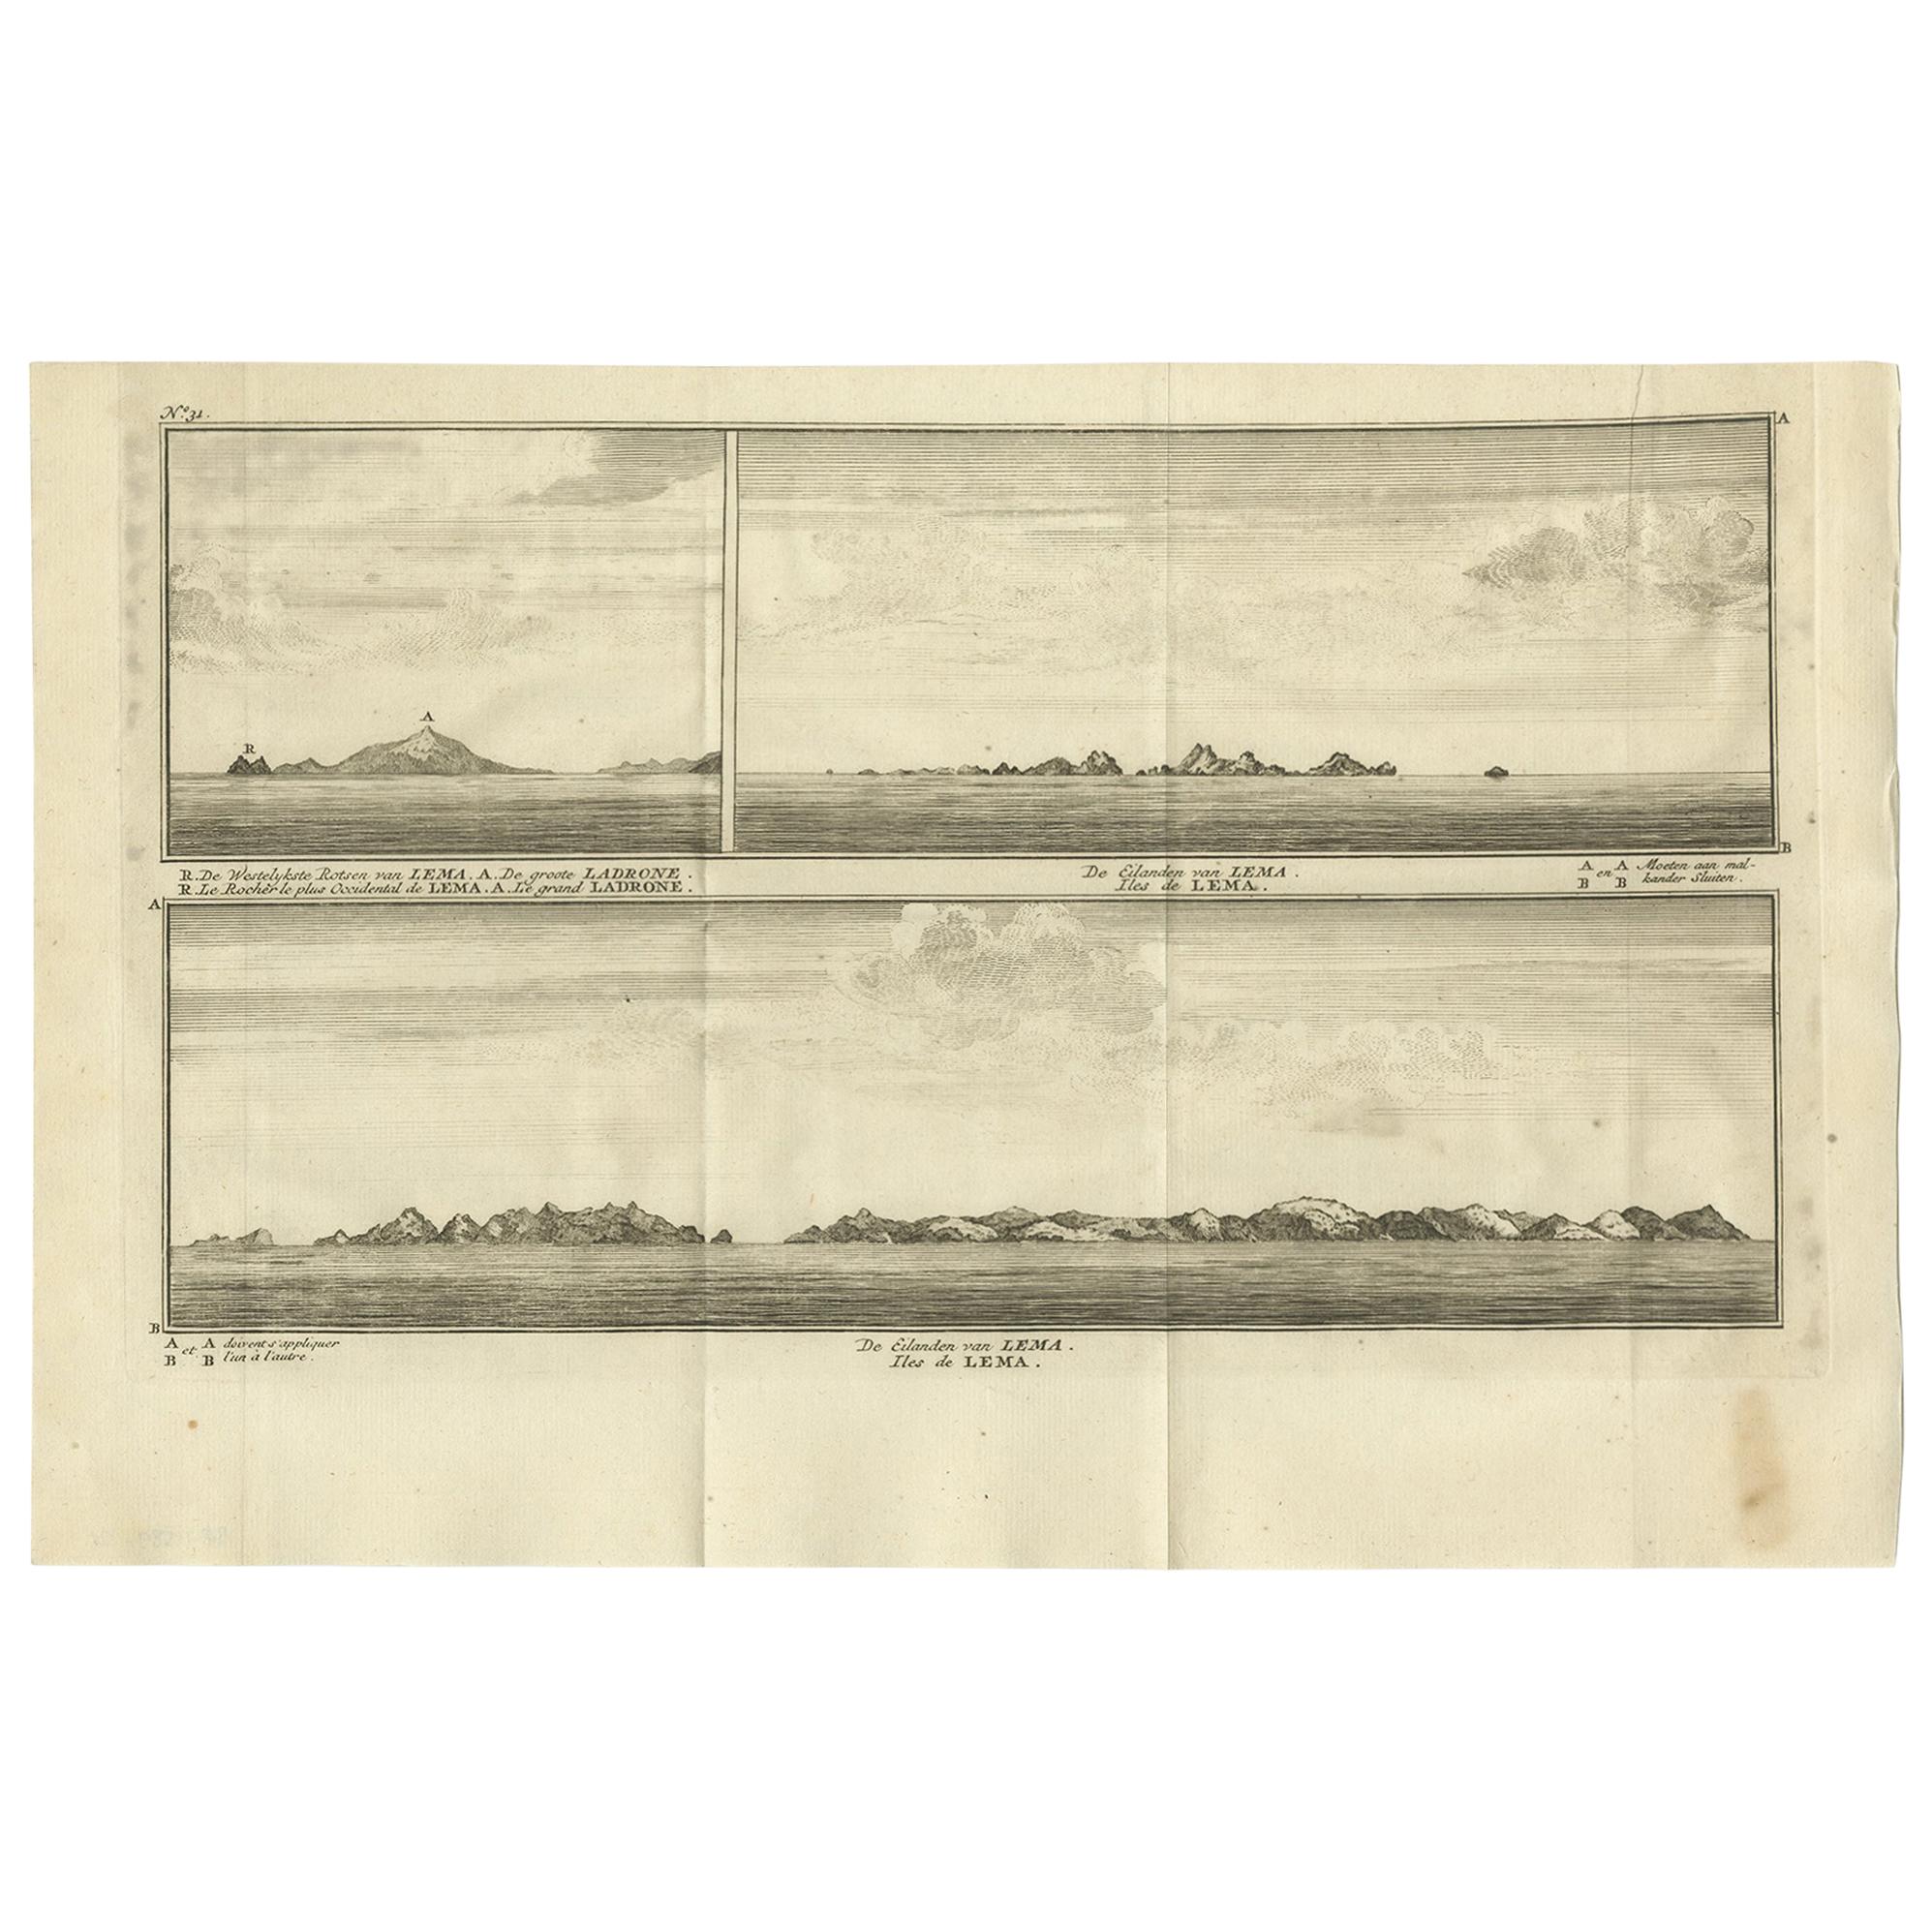 Antique Print with Views of the Lema Islands by Anson '1749' For Sale